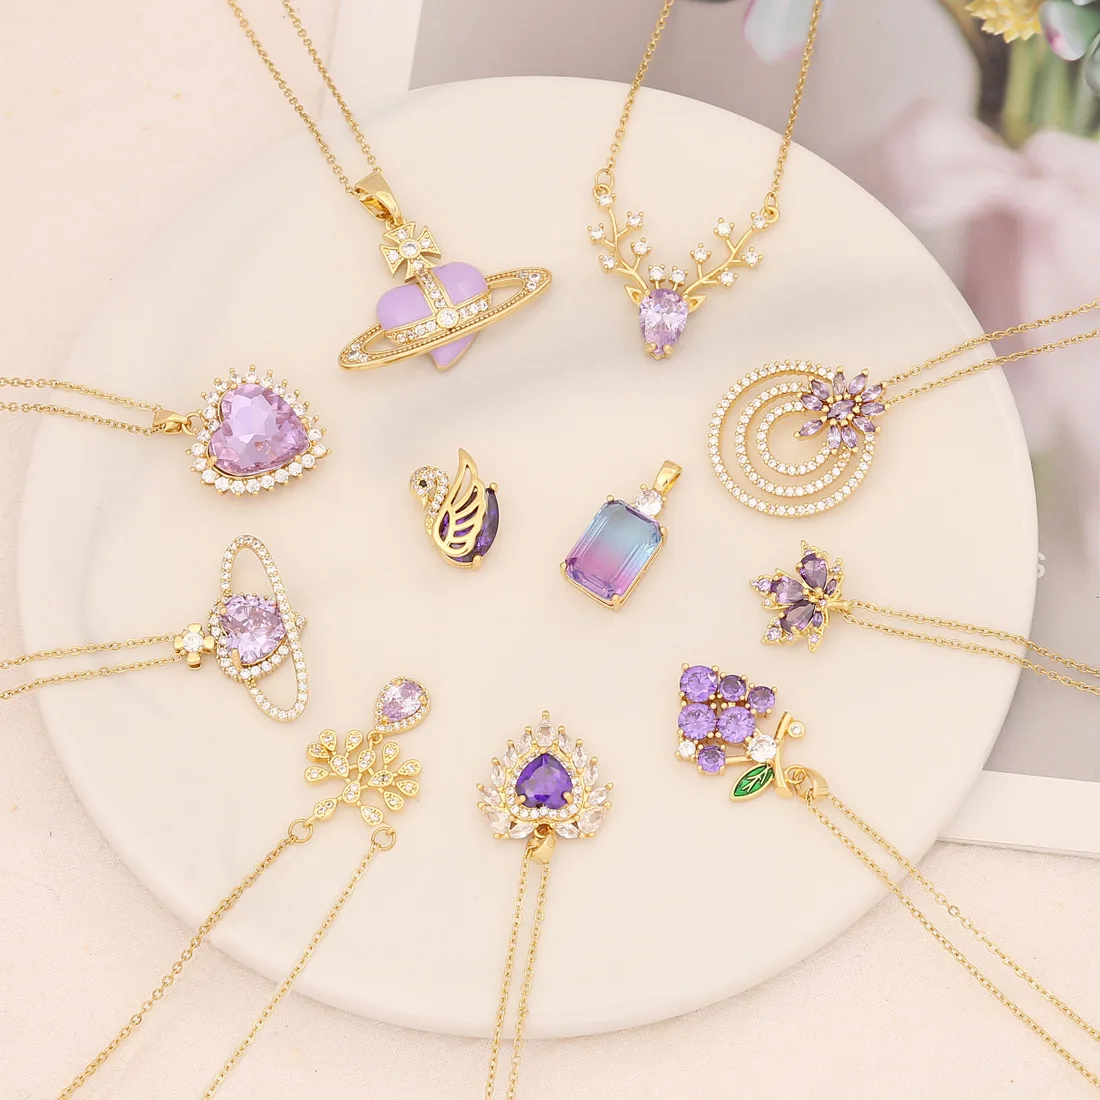 

Purple Crystal Rhinestone Necklace for Women Copper Stainless Steel Heart Swan Pendant Choker Jewelry Accessories Birthday Gift